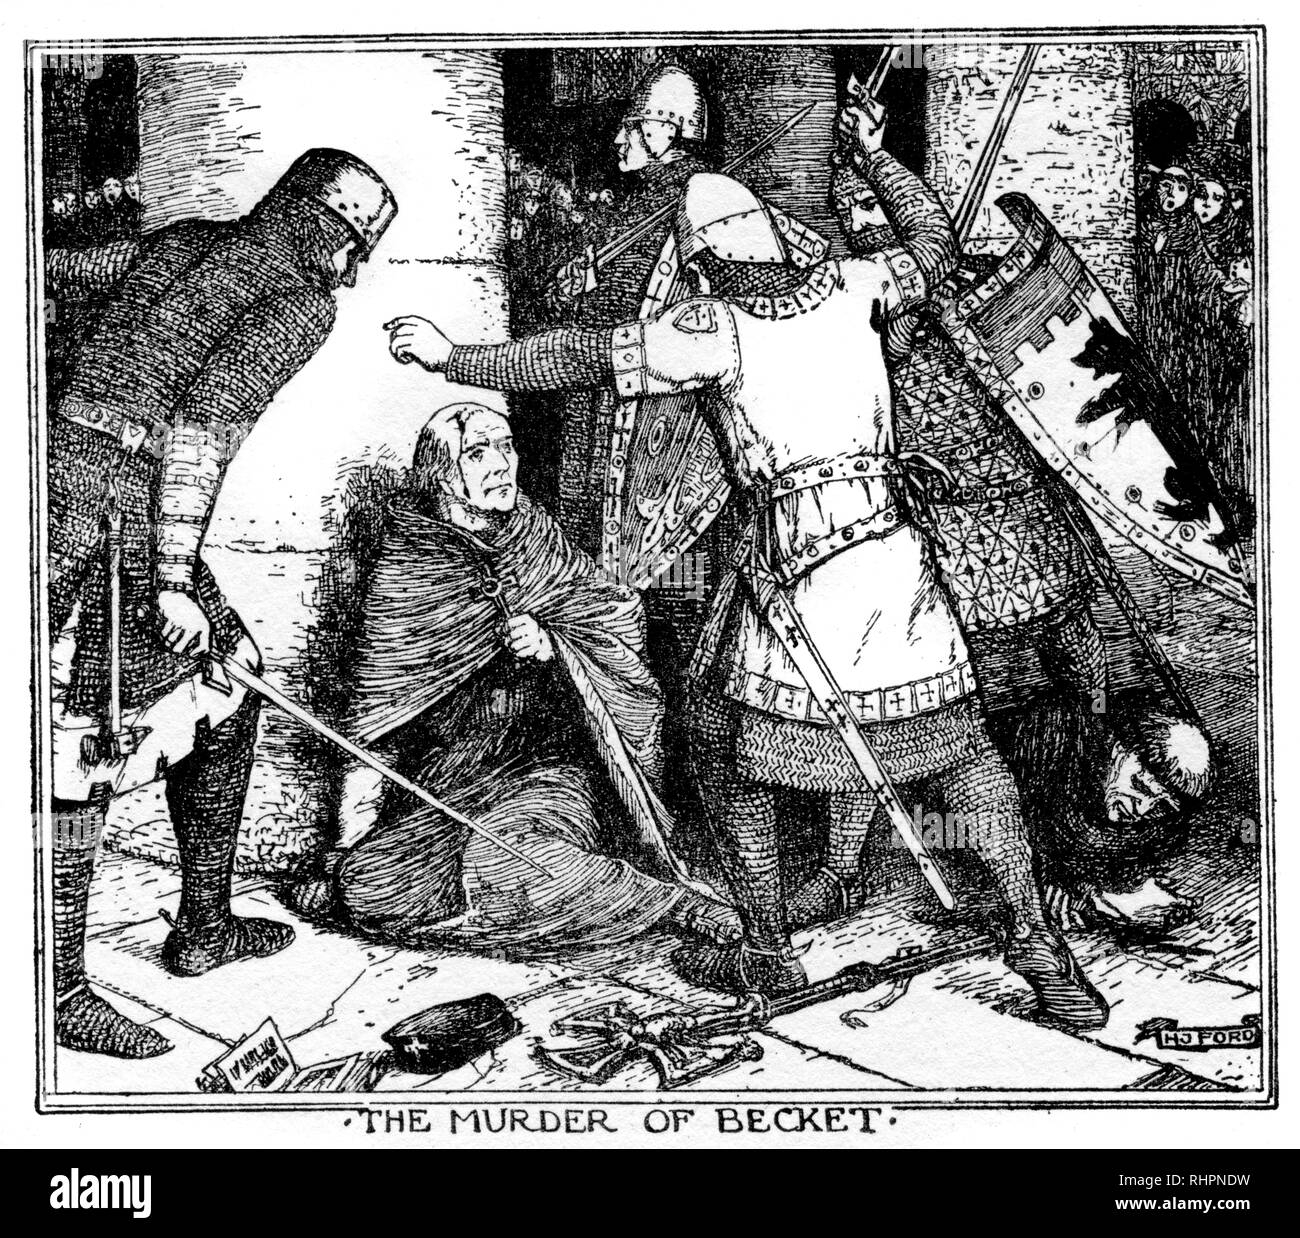 The Murder of Becket. Thomas Becket, also known as Saint Thomas of Canterbury, Thomas of London and Thomas à Becket (c1119–1170), was Archbishop of Canterbury from 1162 until his murder in 1170. He is venerated as a saint and martyr by both the Catholic Church and the Anglican Communion. He engaged in conflict with Henry II, King of England, over the rights of the Church and was murdered by followers of the king in Canterbury Cathedral. Stock Photo